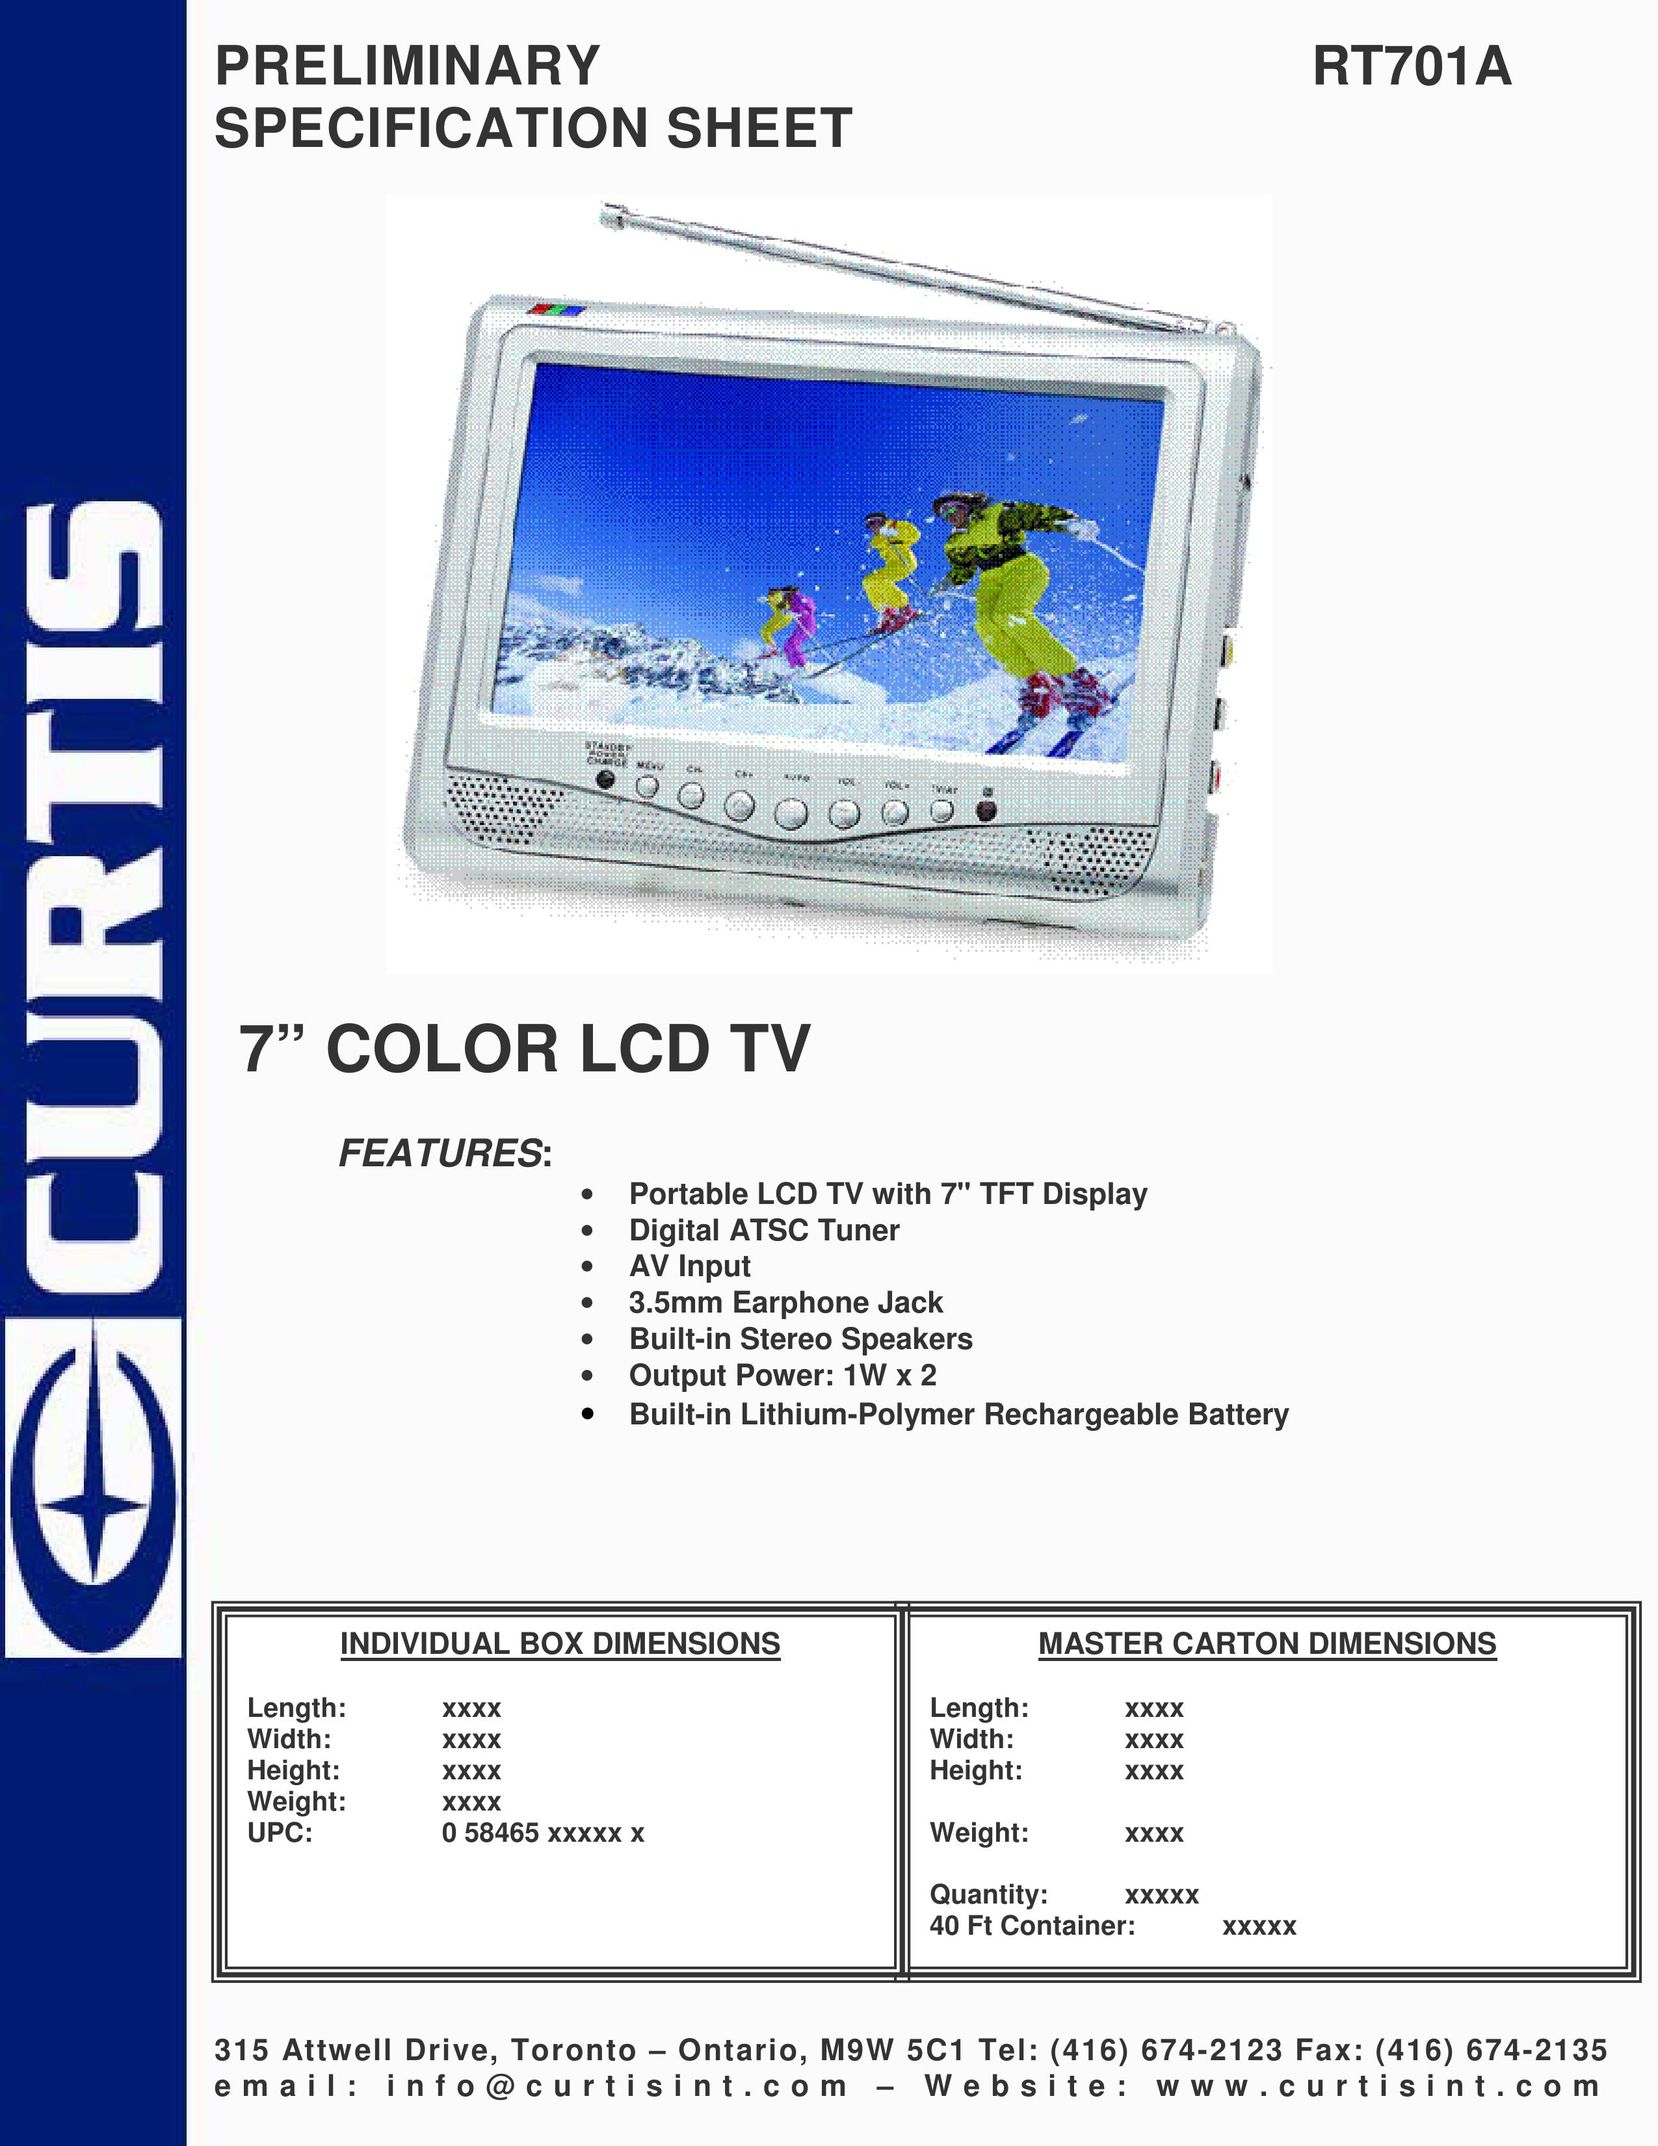 Curtis RT701A CRT Television User Manual